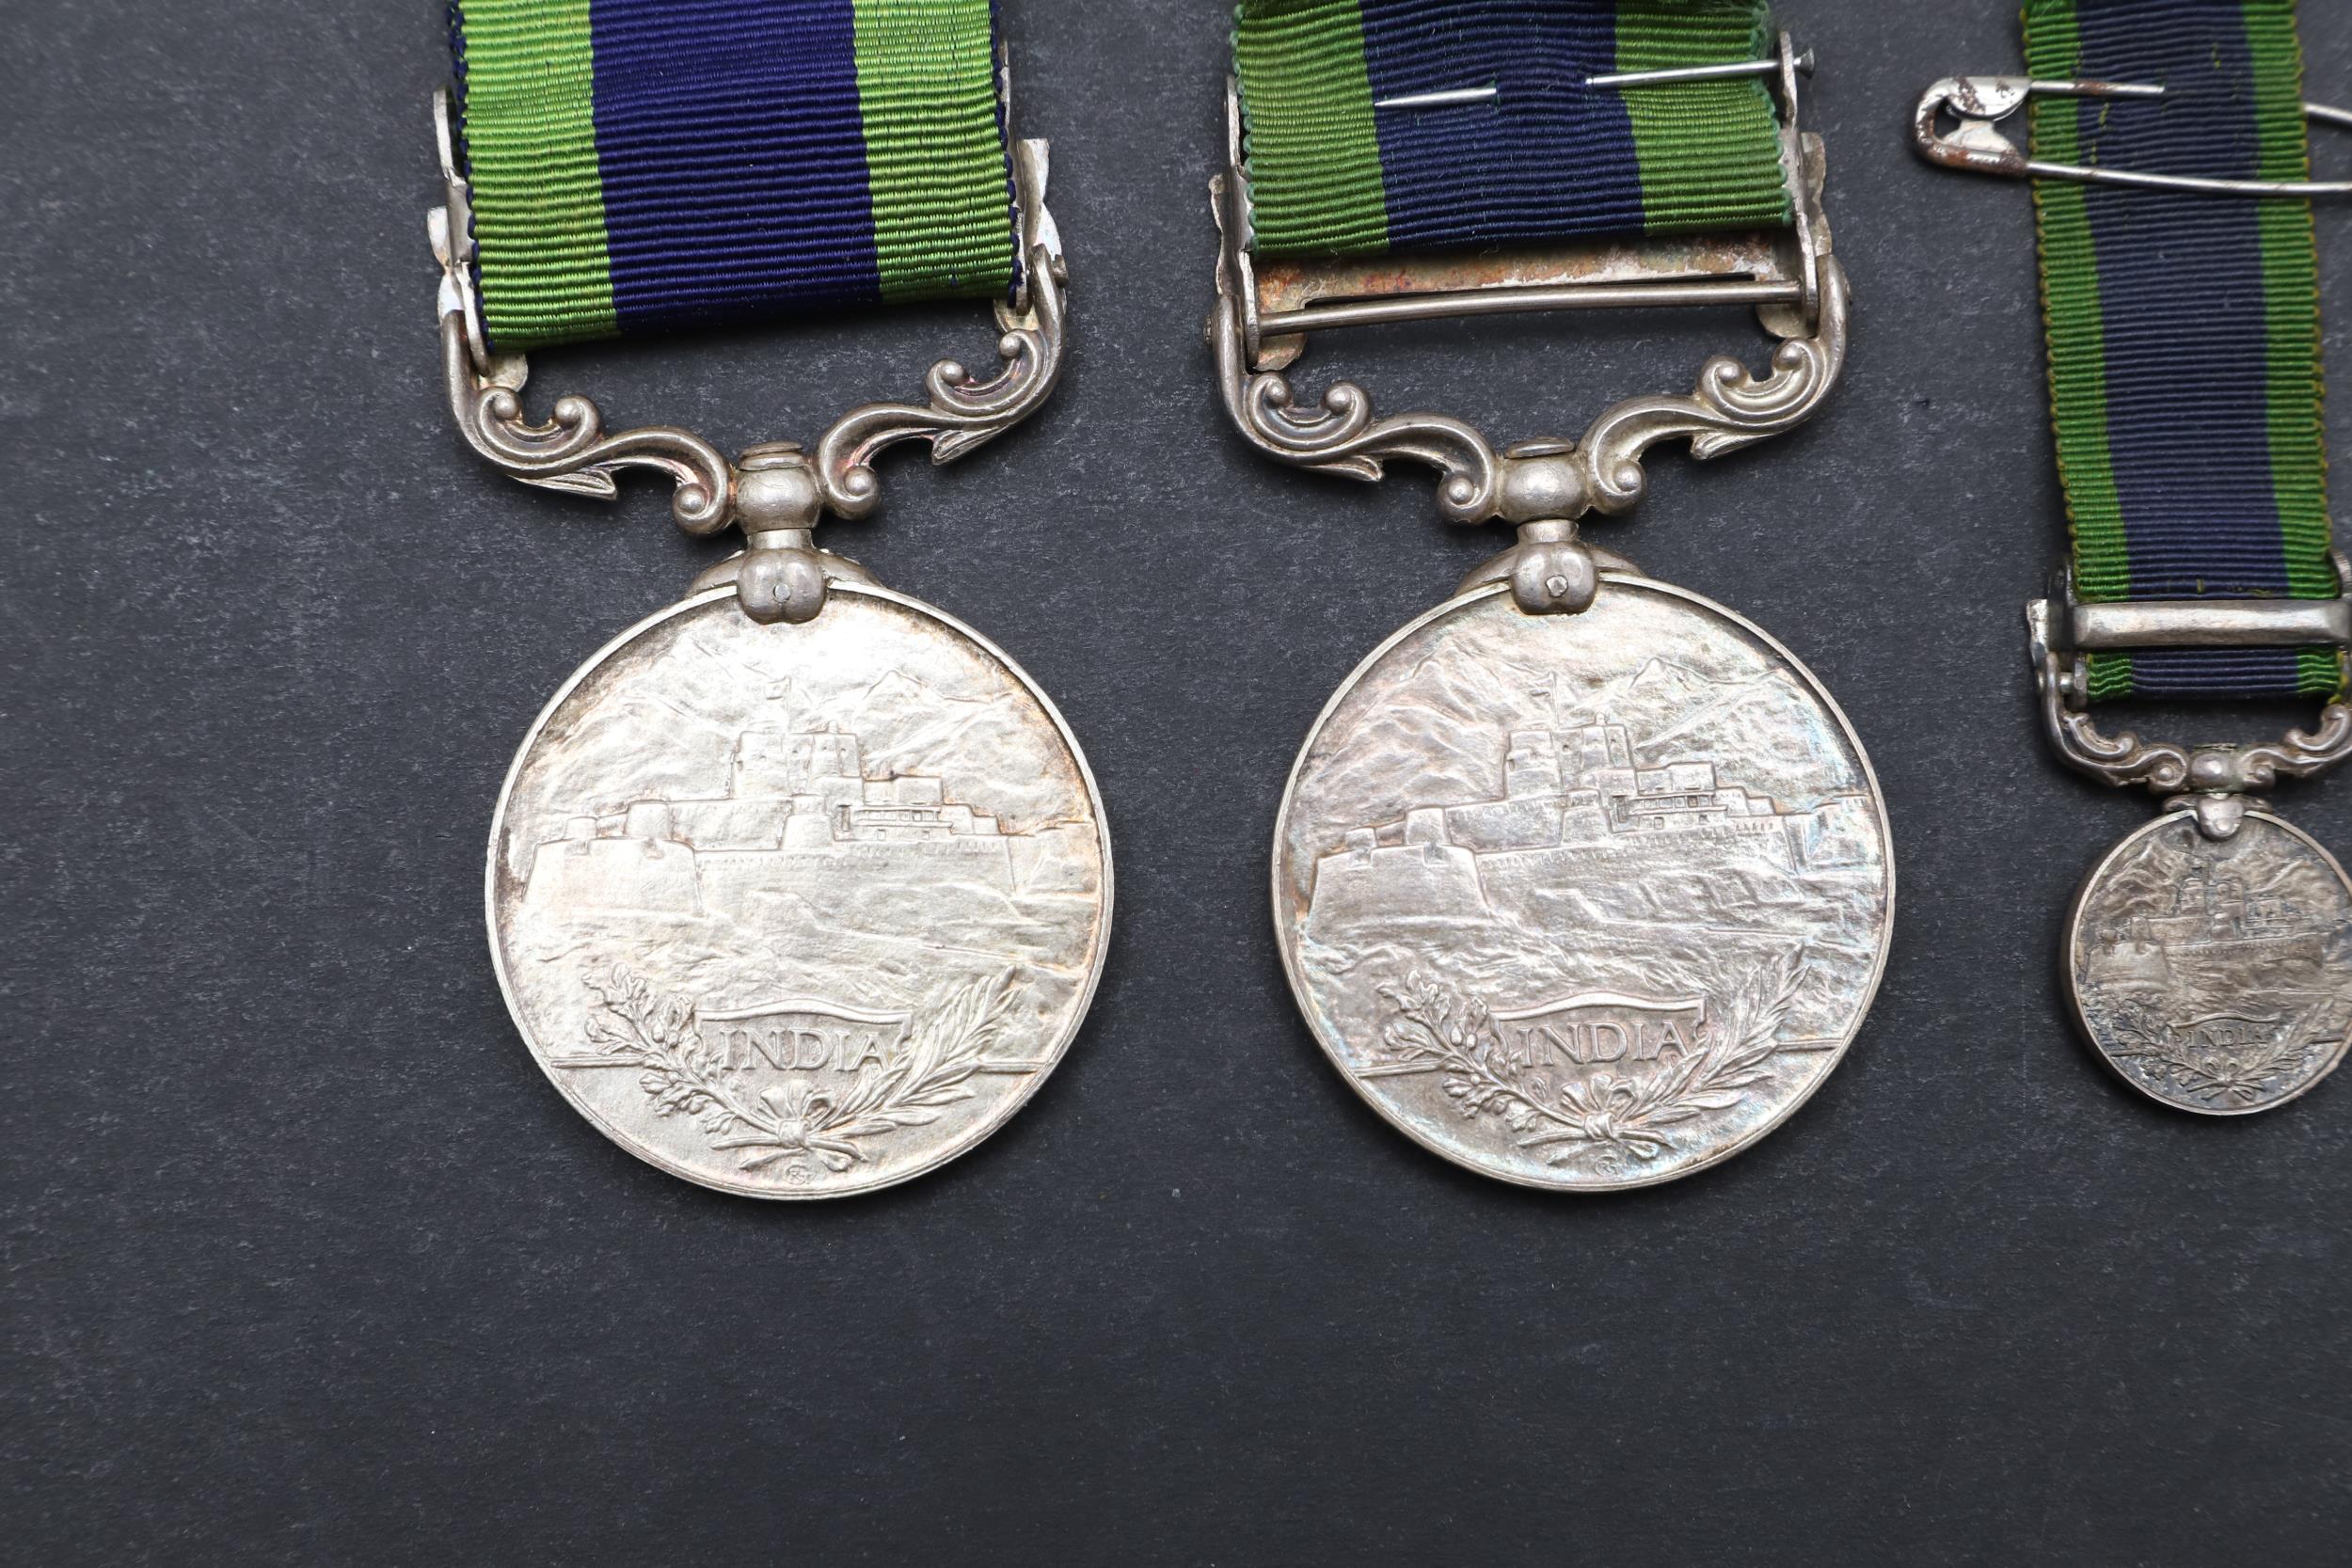 TWO INDIA GENERAL SERVICE MEDALS APPARENTLY AWARDED TO THE SAME MAN, A CASUALTY OF A BOMBING INCIDEN - Image 6 of 8